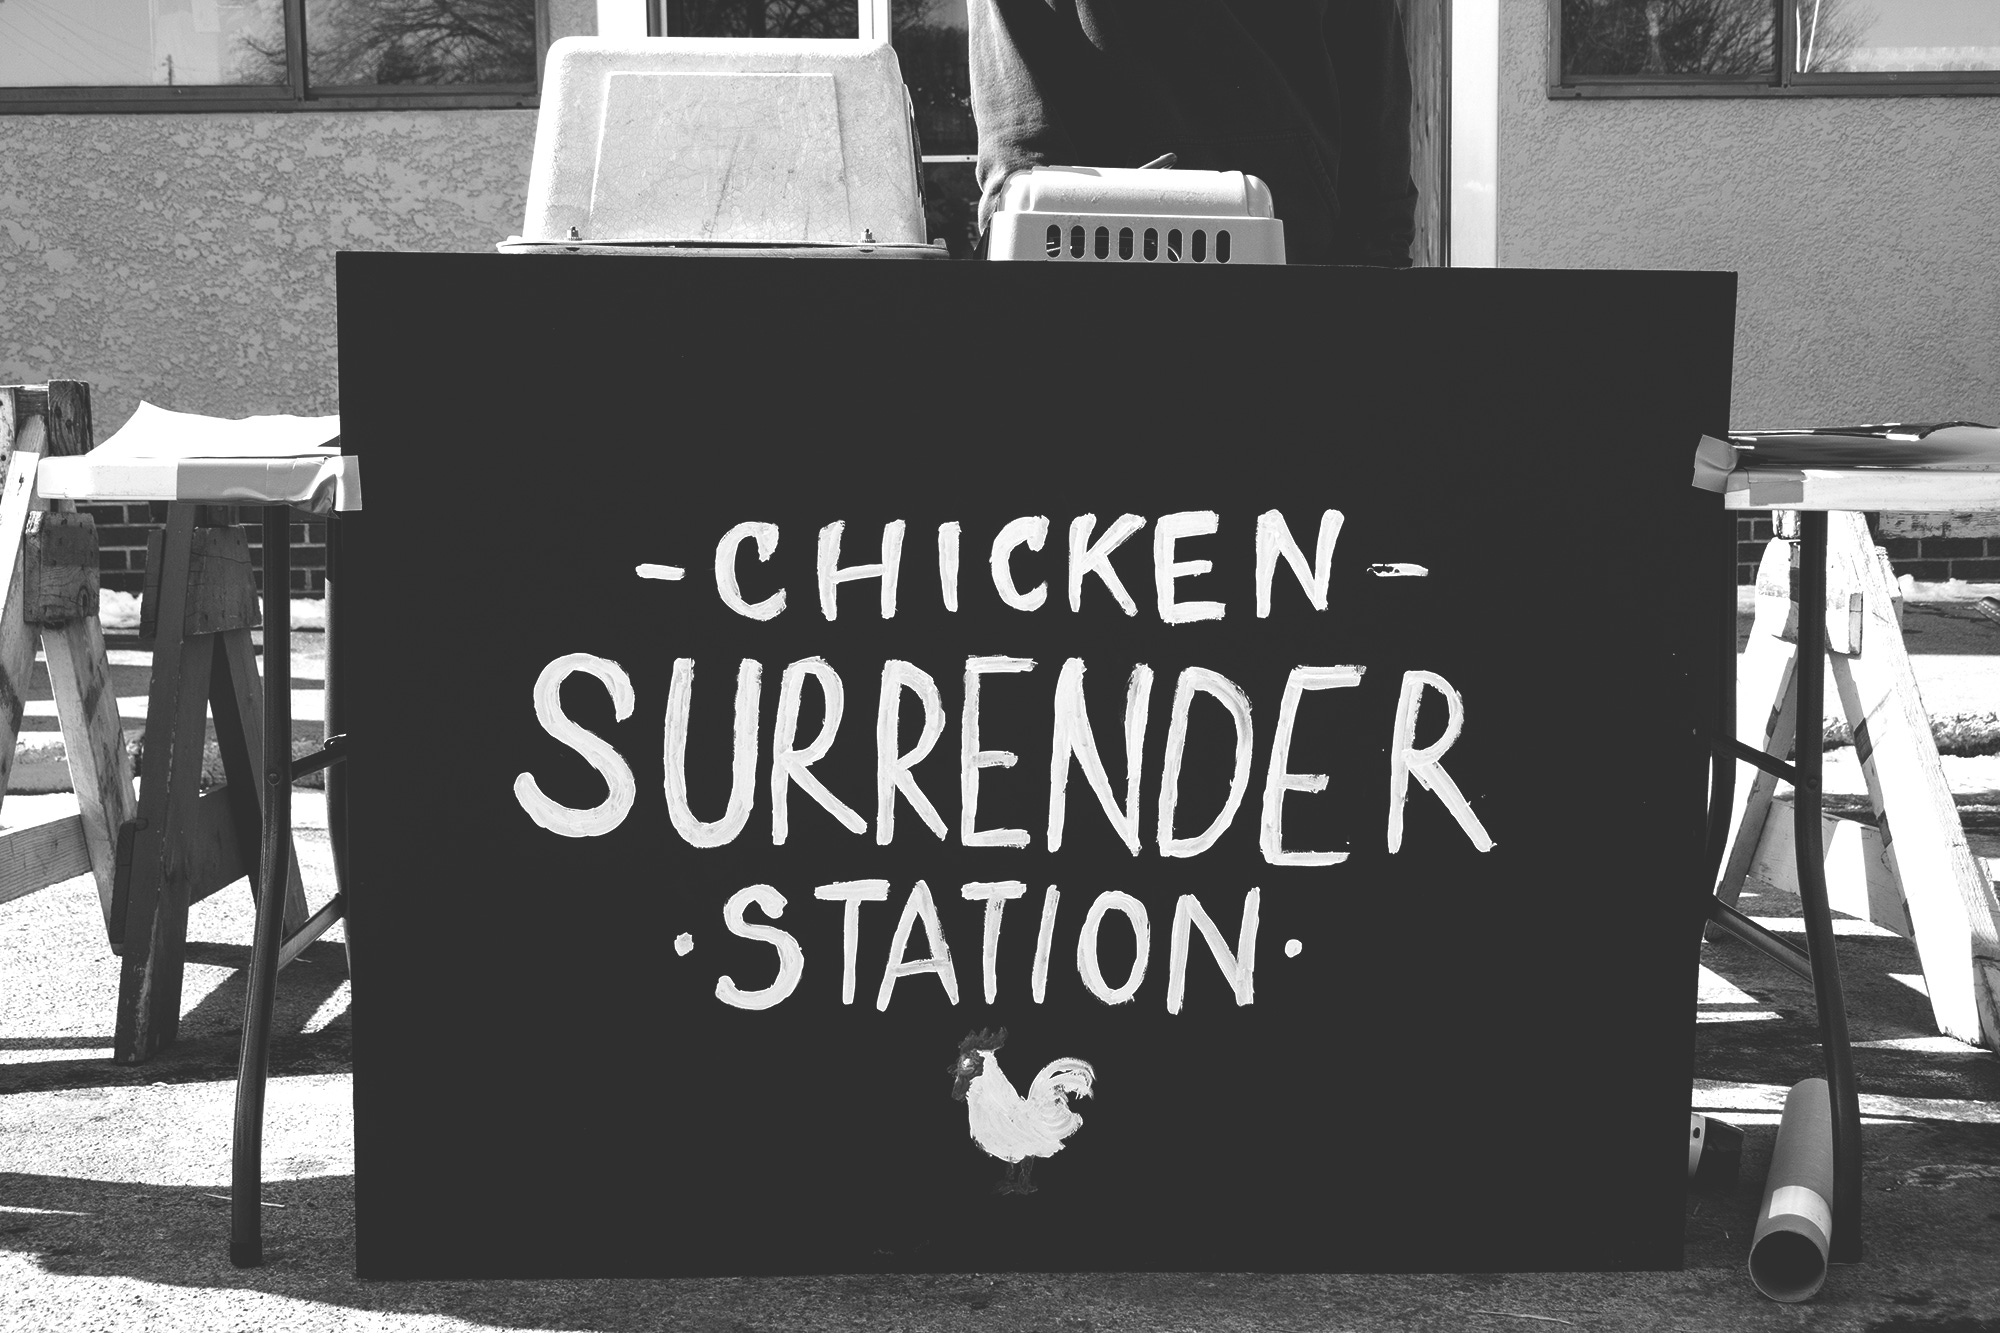 Table with sign: Chicken Surrender Station.